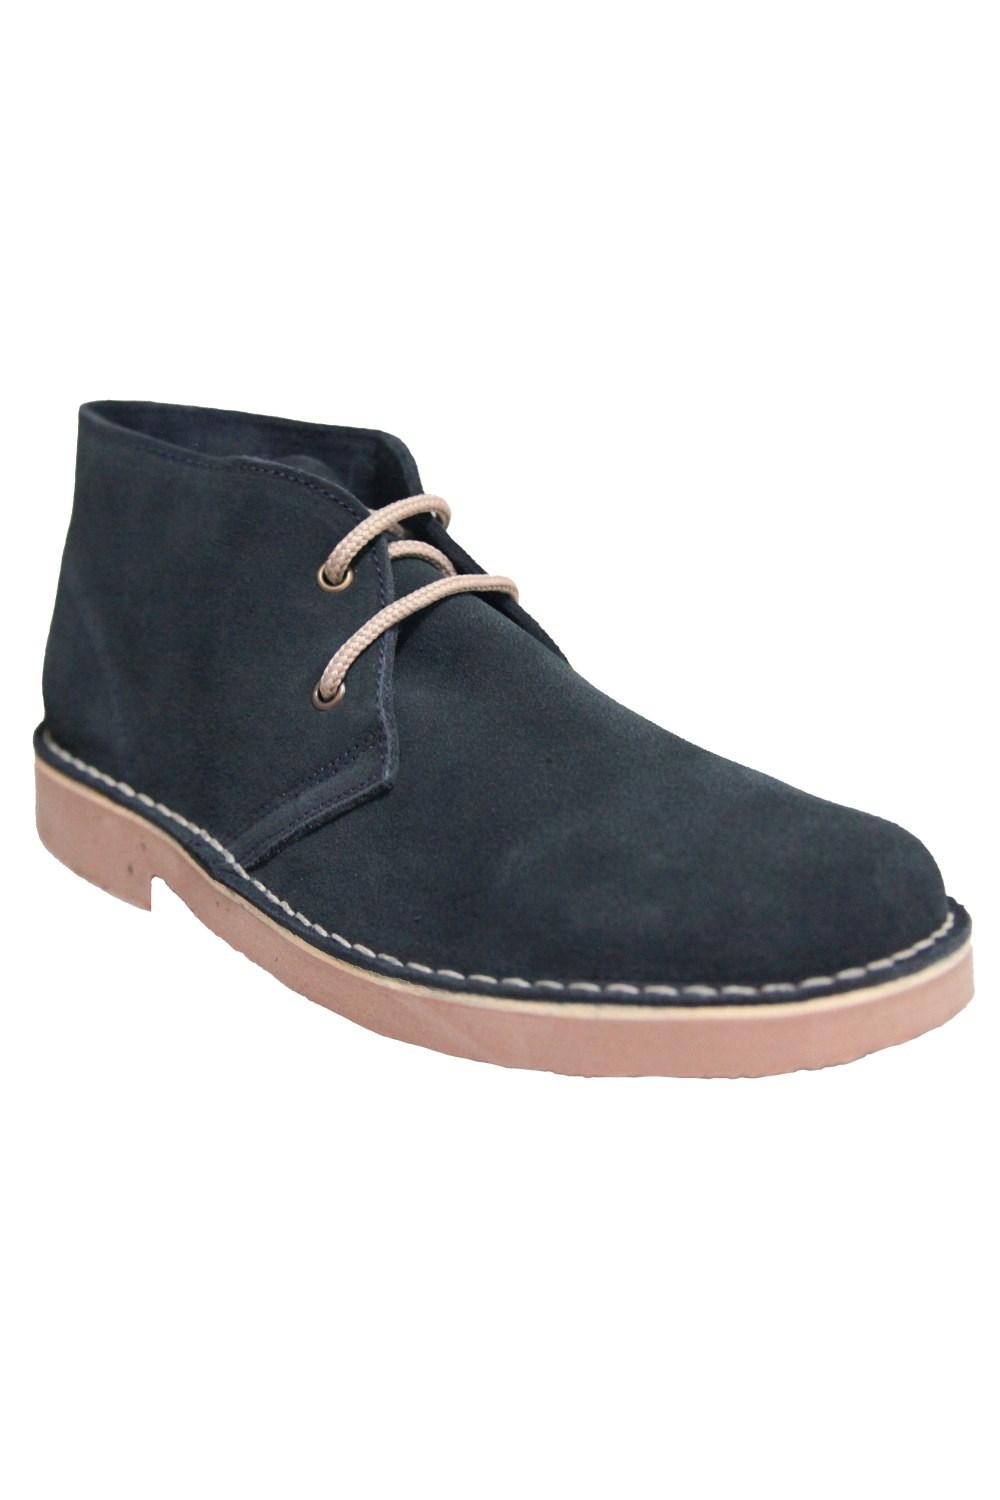 Mens Real Suede Unlined Desert Boots -